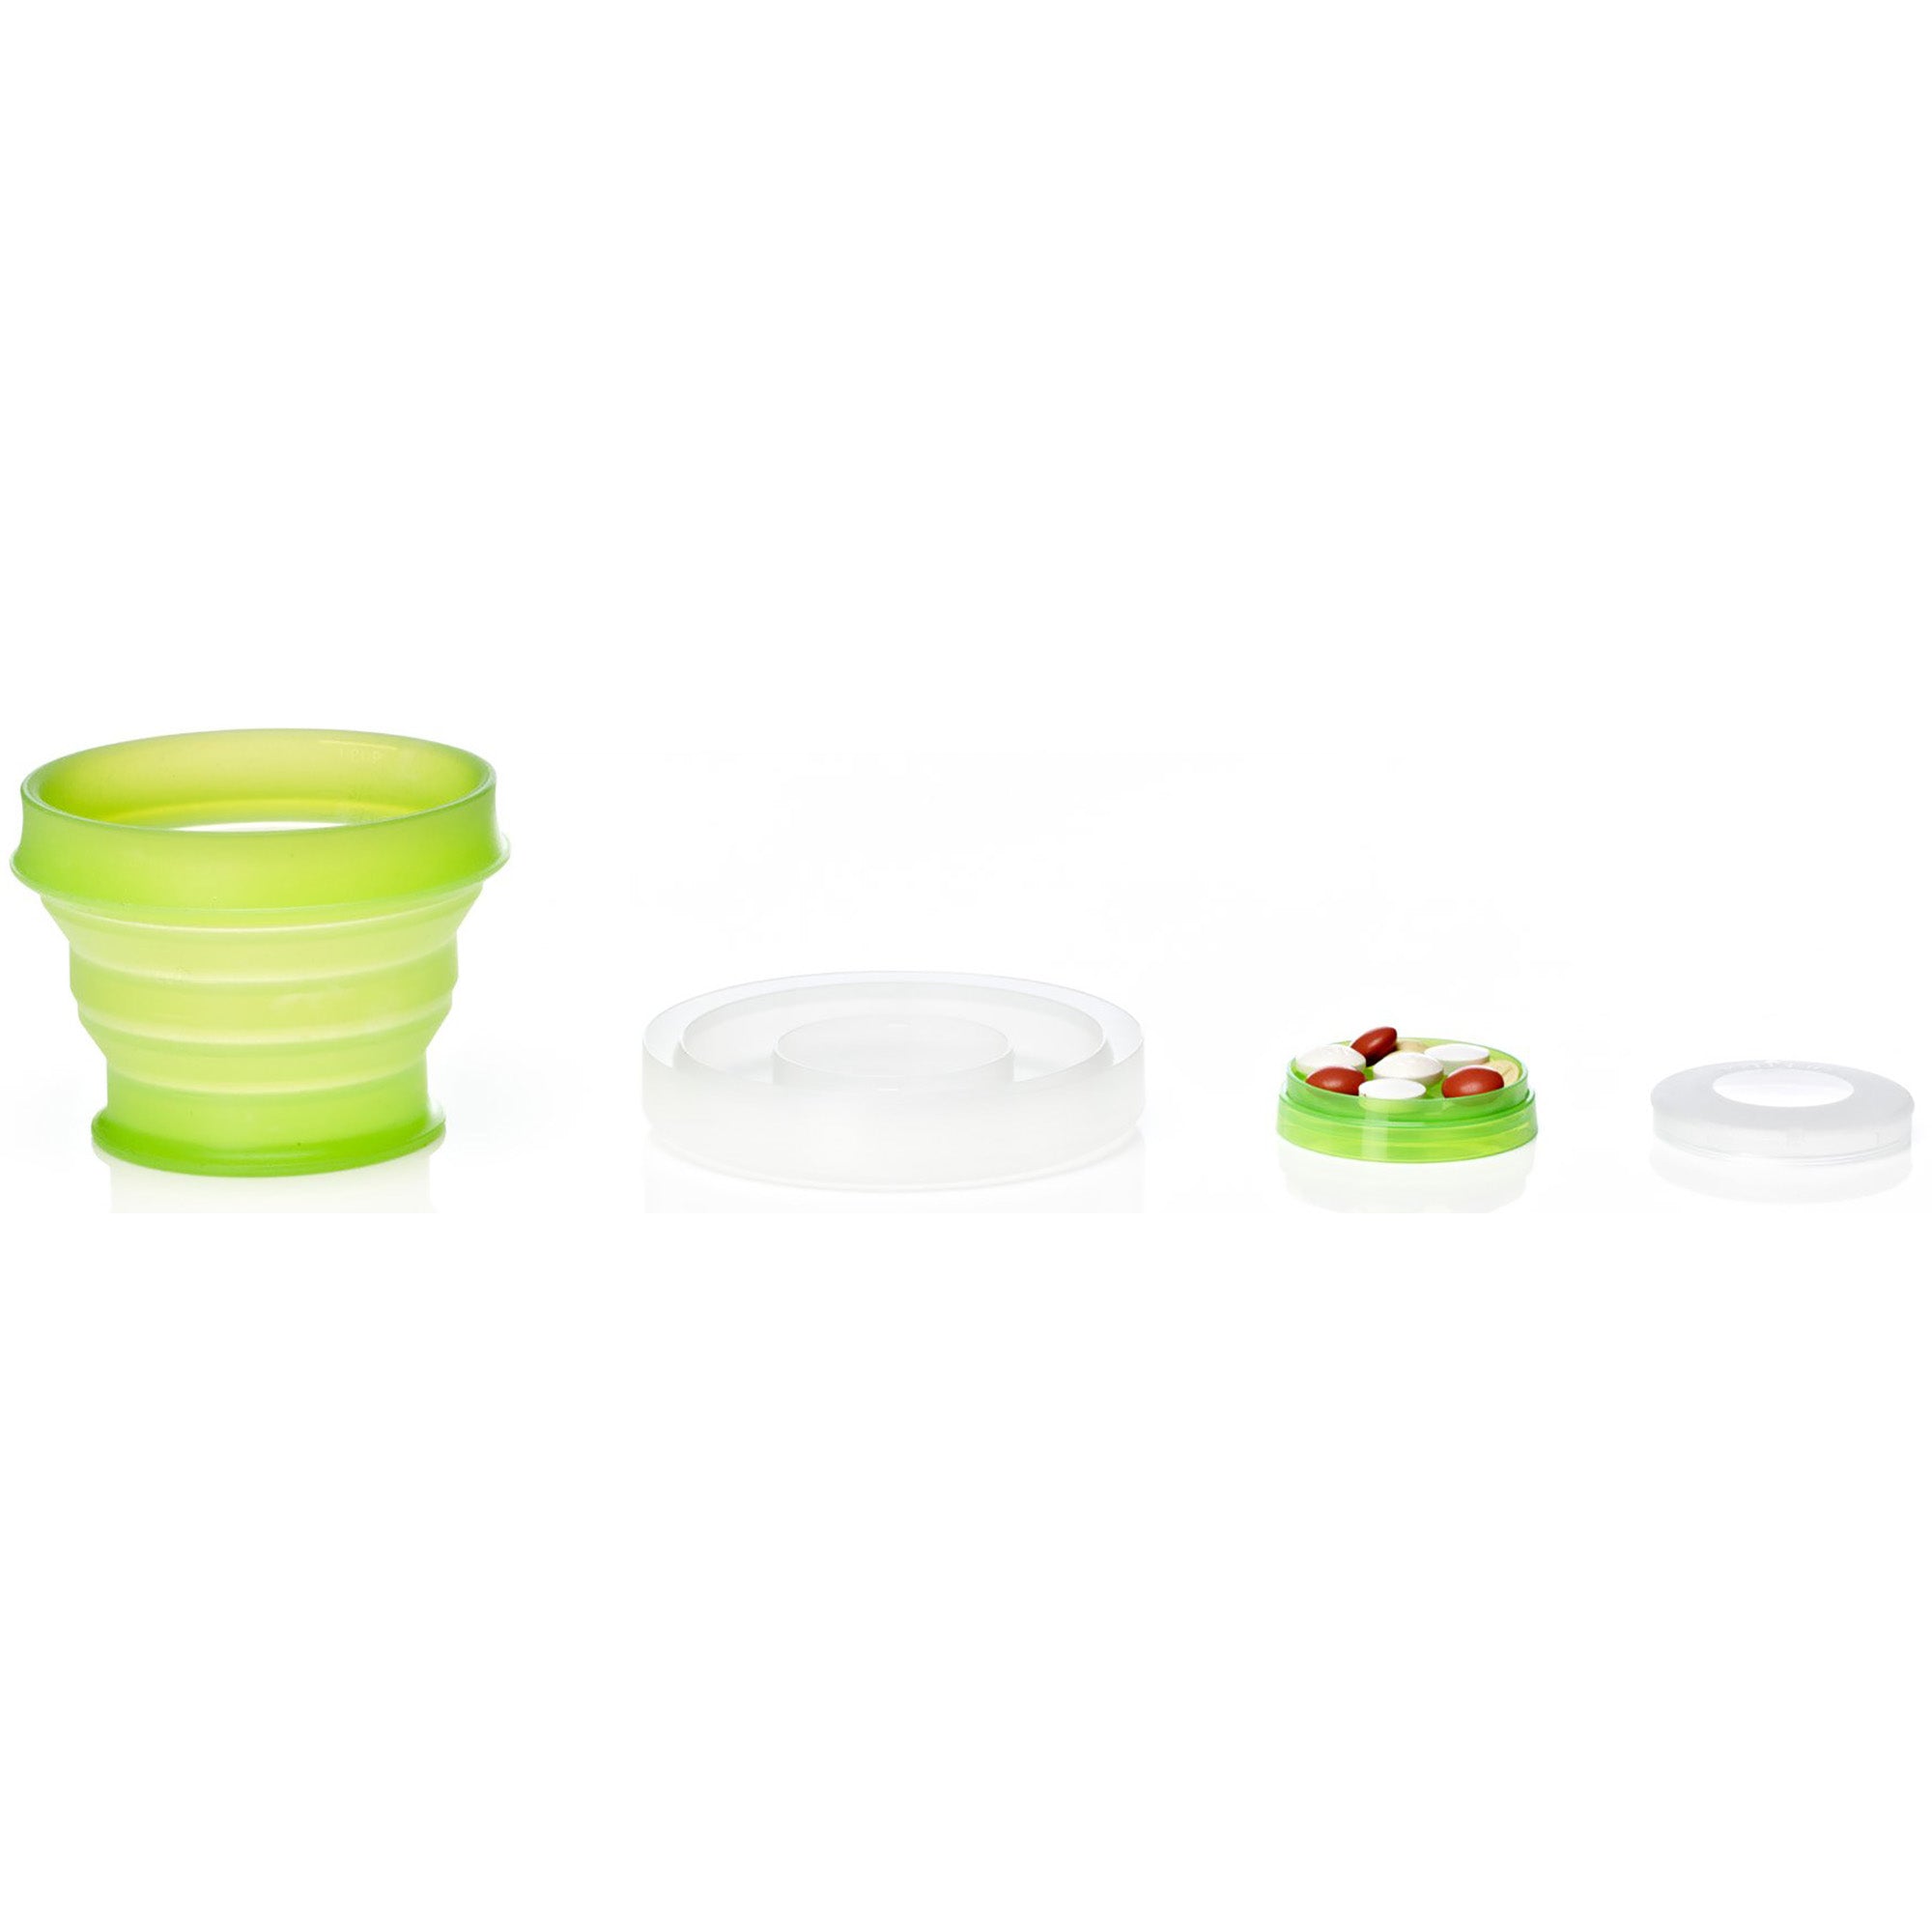 Humangear GoCup 4 oz. Collapsible Travel Cup Humangear